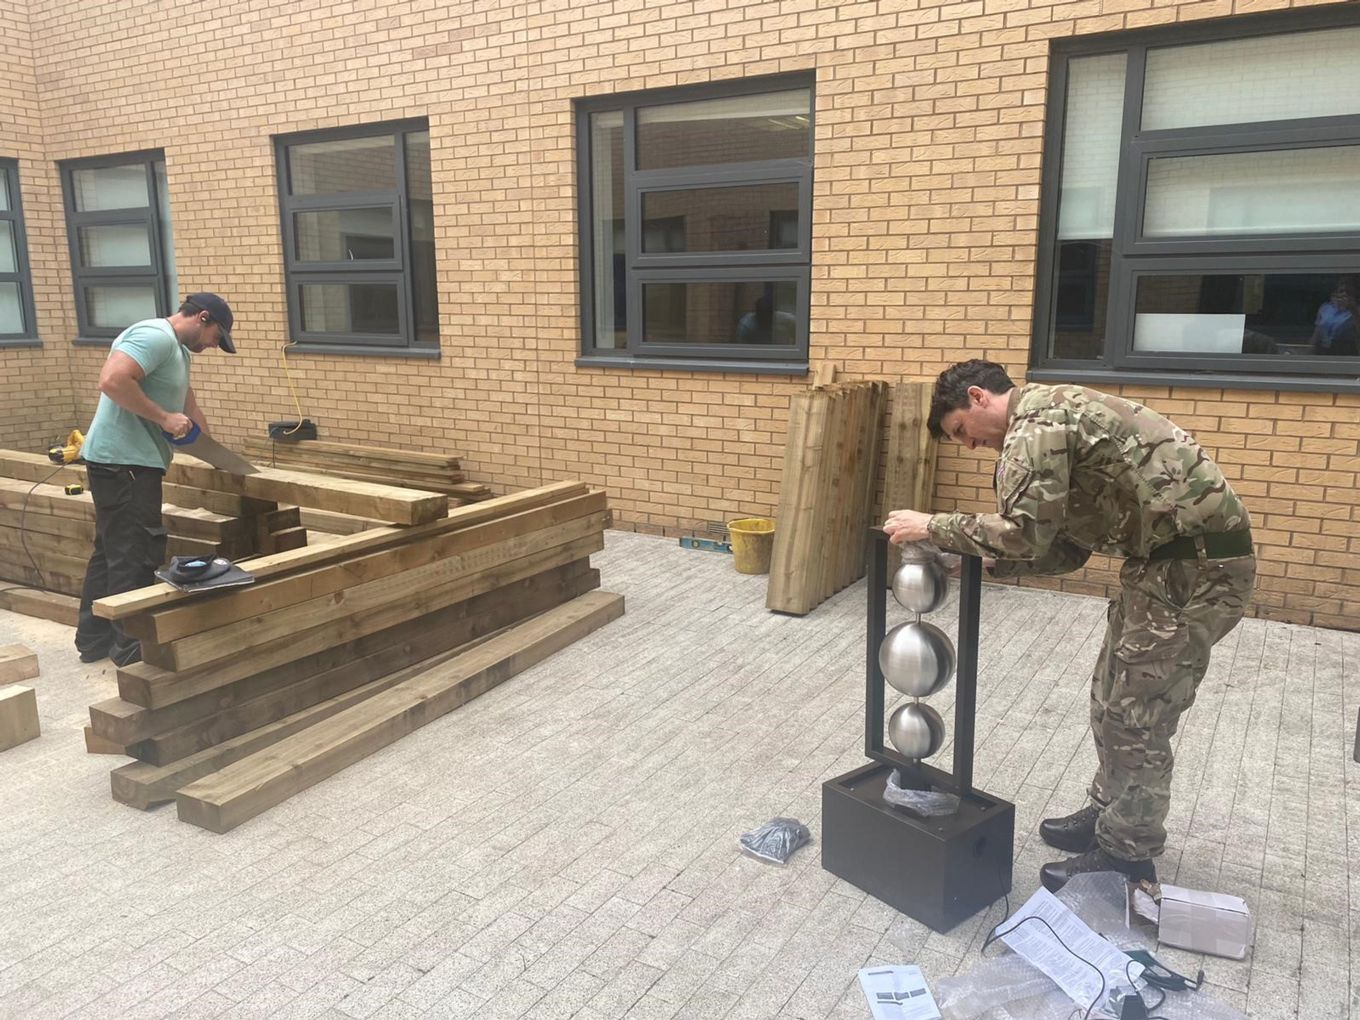 Work in Progress – ‘All hands to the deck’ to make the garden relaxing and welcoming with bespoke wooden benches and a water feature